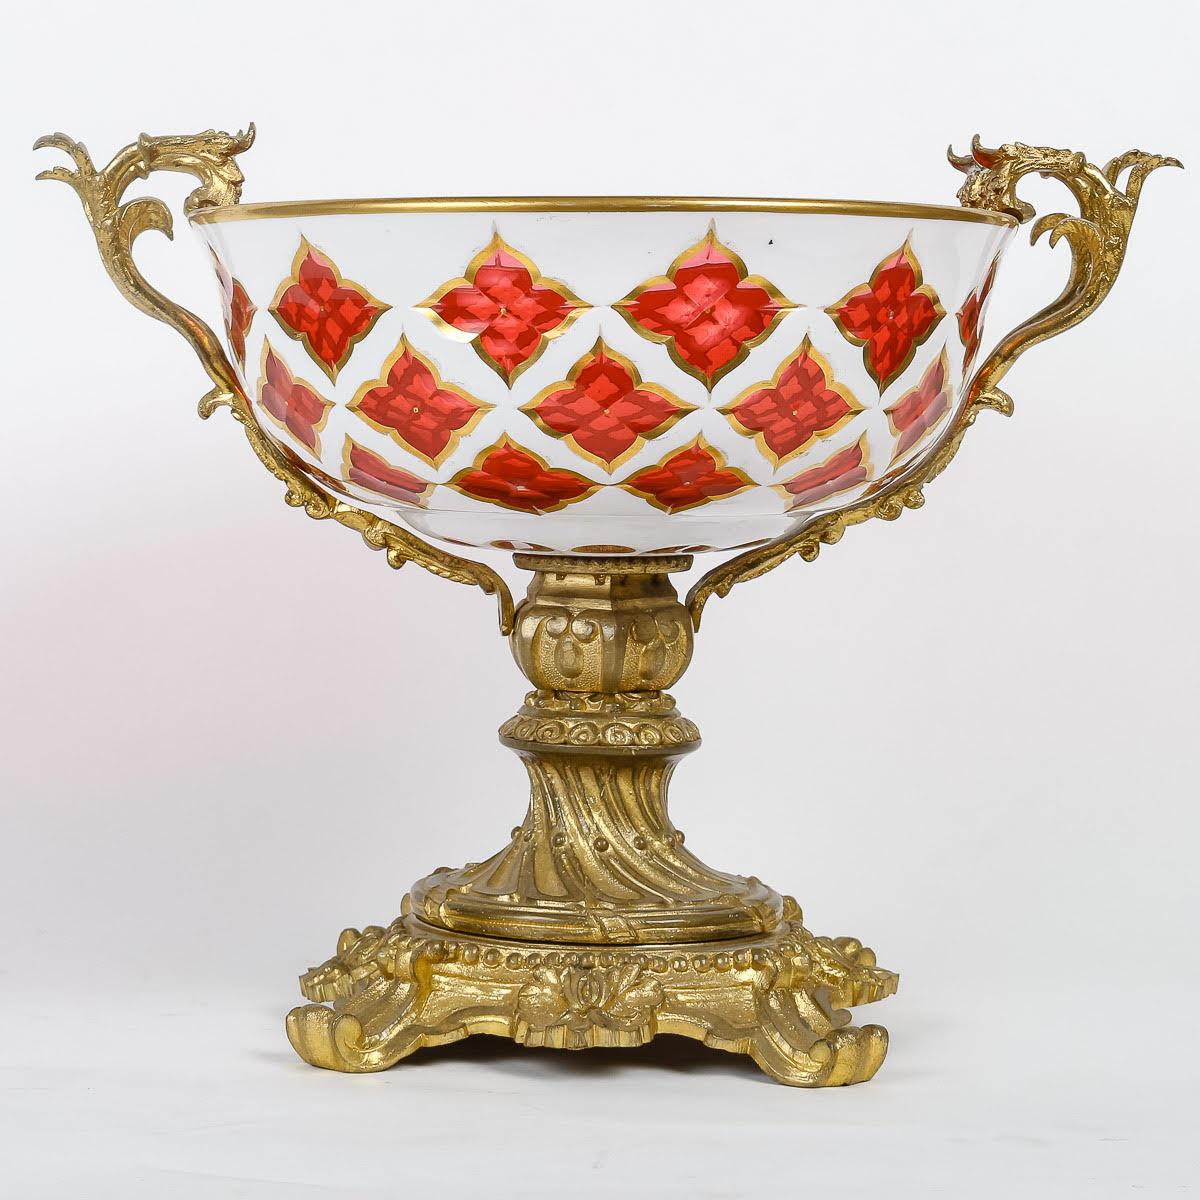 Bohemian Opaline Overlay and Gilt Bronze Bowl, 19th Century.

A 19th century Napoleon III period cup in Bohemian opaline overlay and gilt bronze.
H: 28cm, W: 36cm, D: 25cm